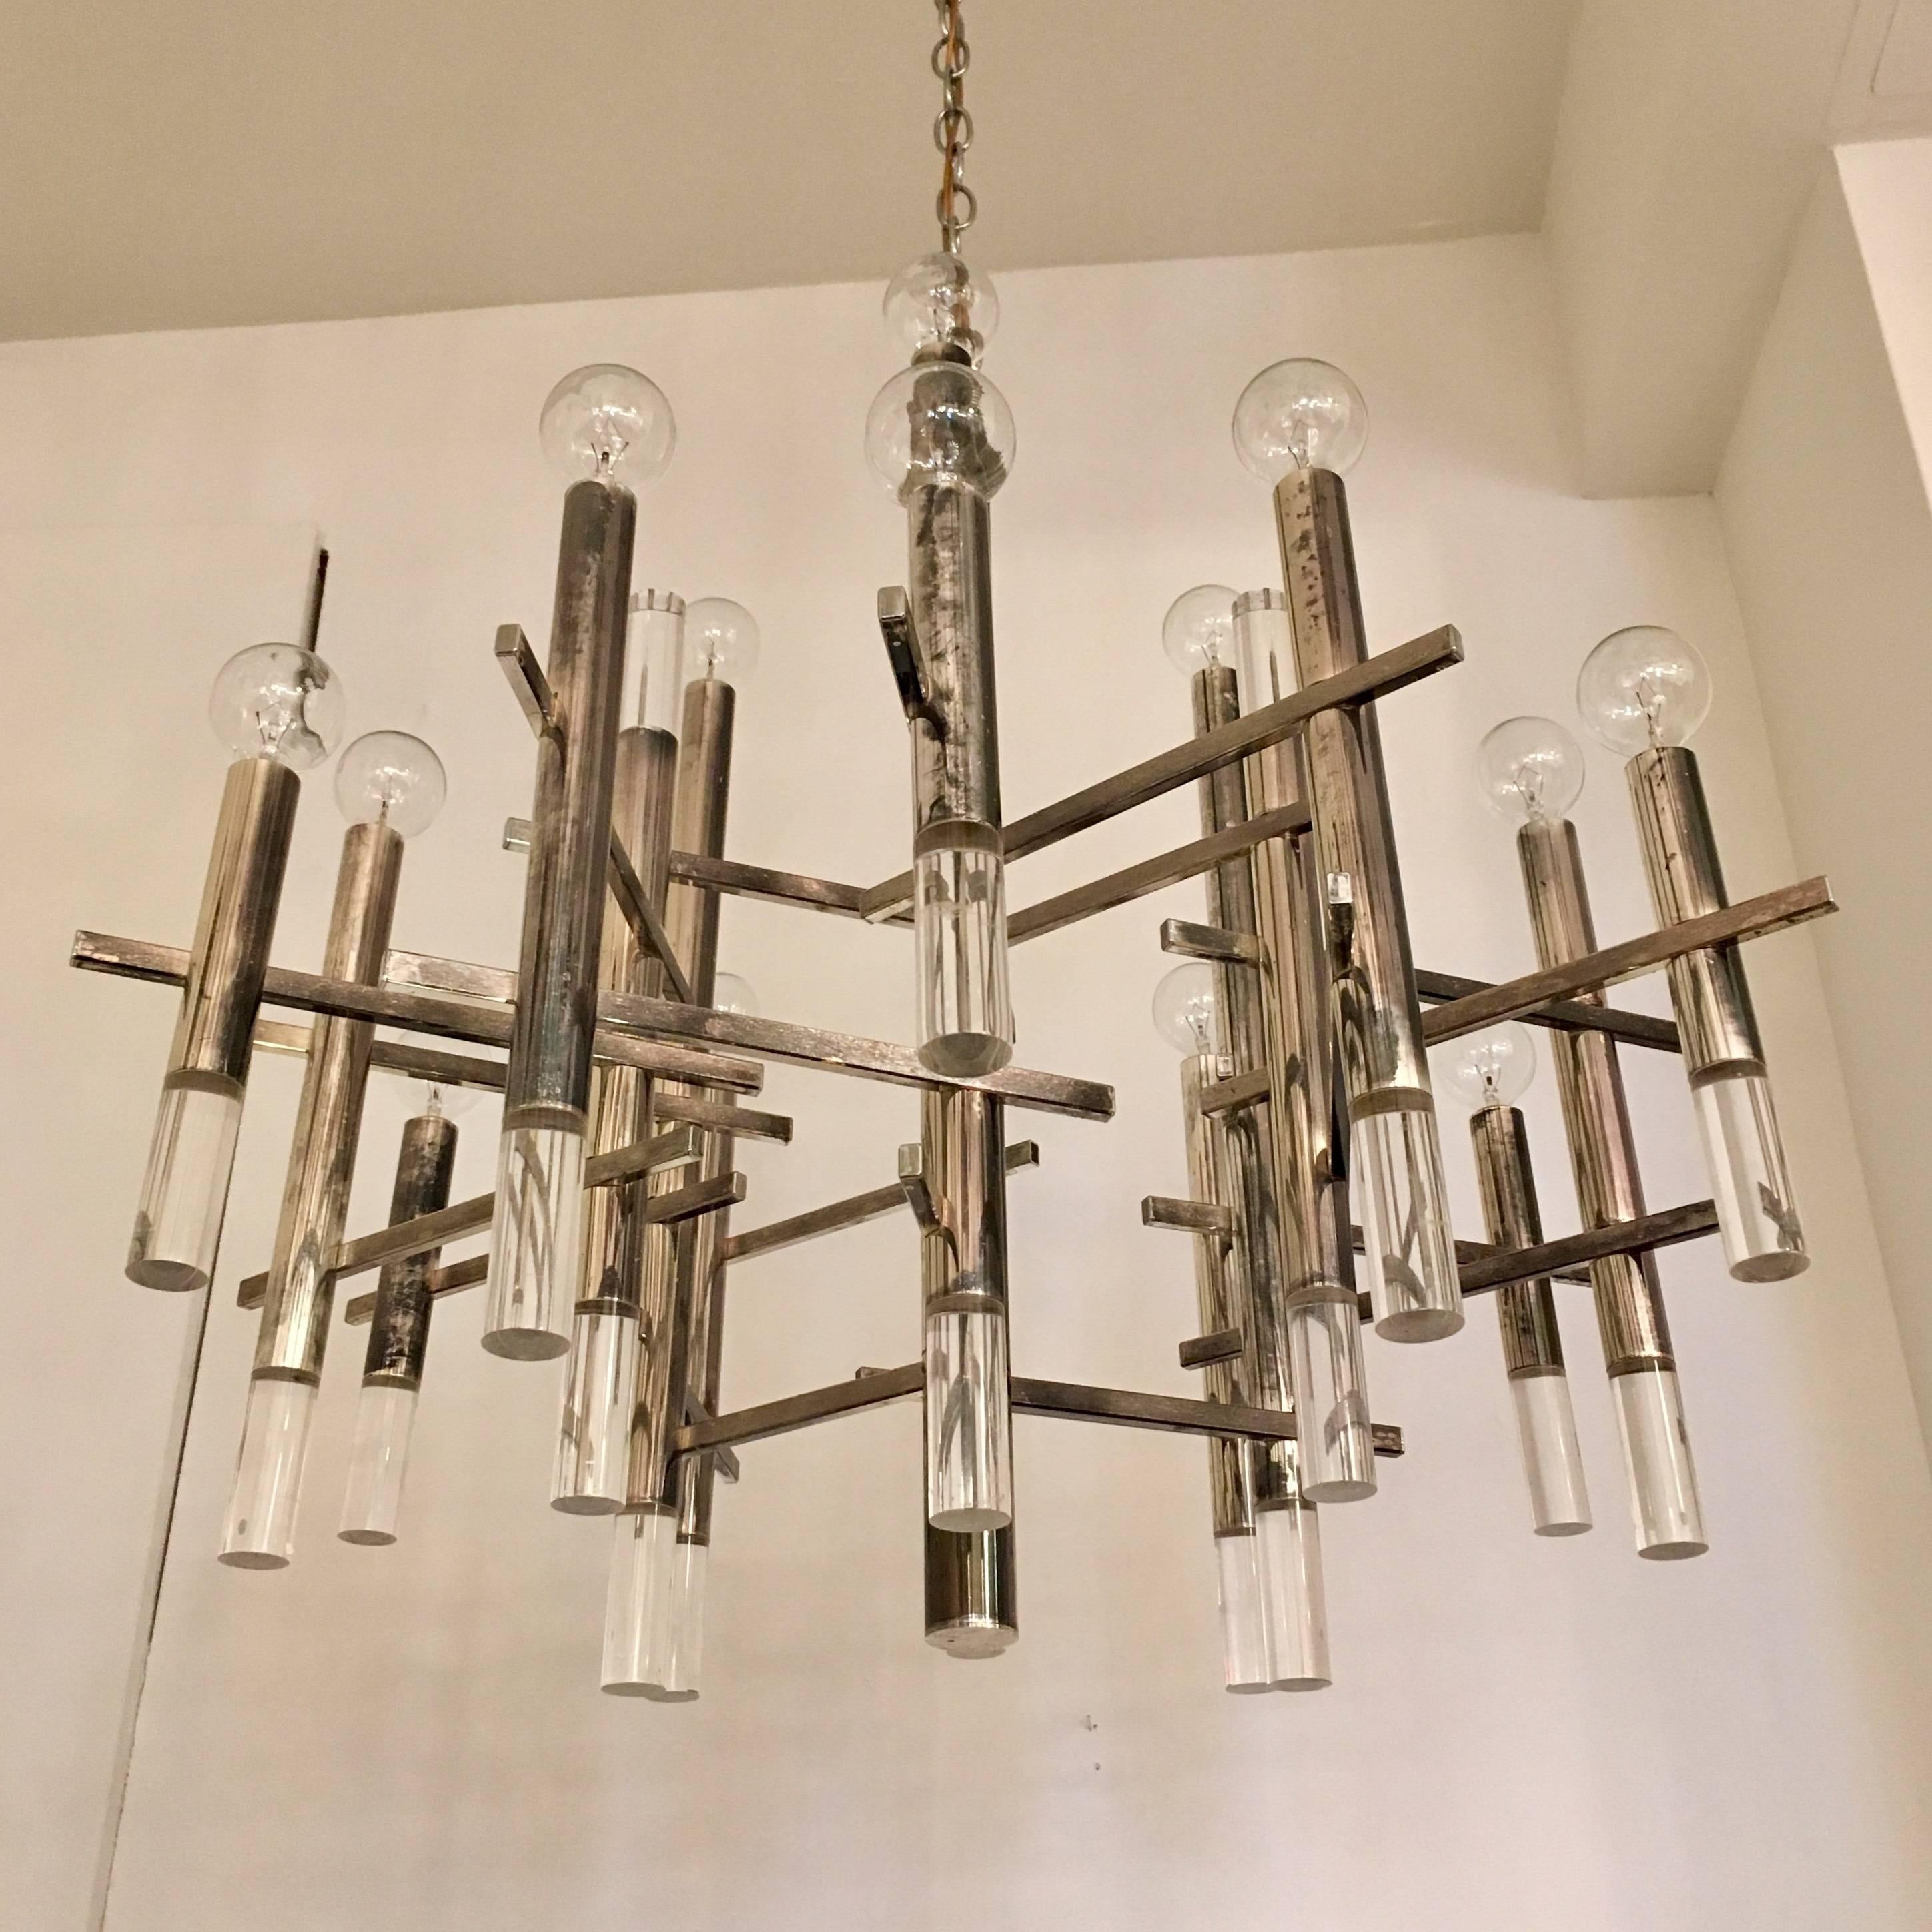 A great 1960s Italian chandelier composed of polished chrome and Lucite fixture with sixteen-light sources made by the famed lighting company, Sciolari. Newly rewired.